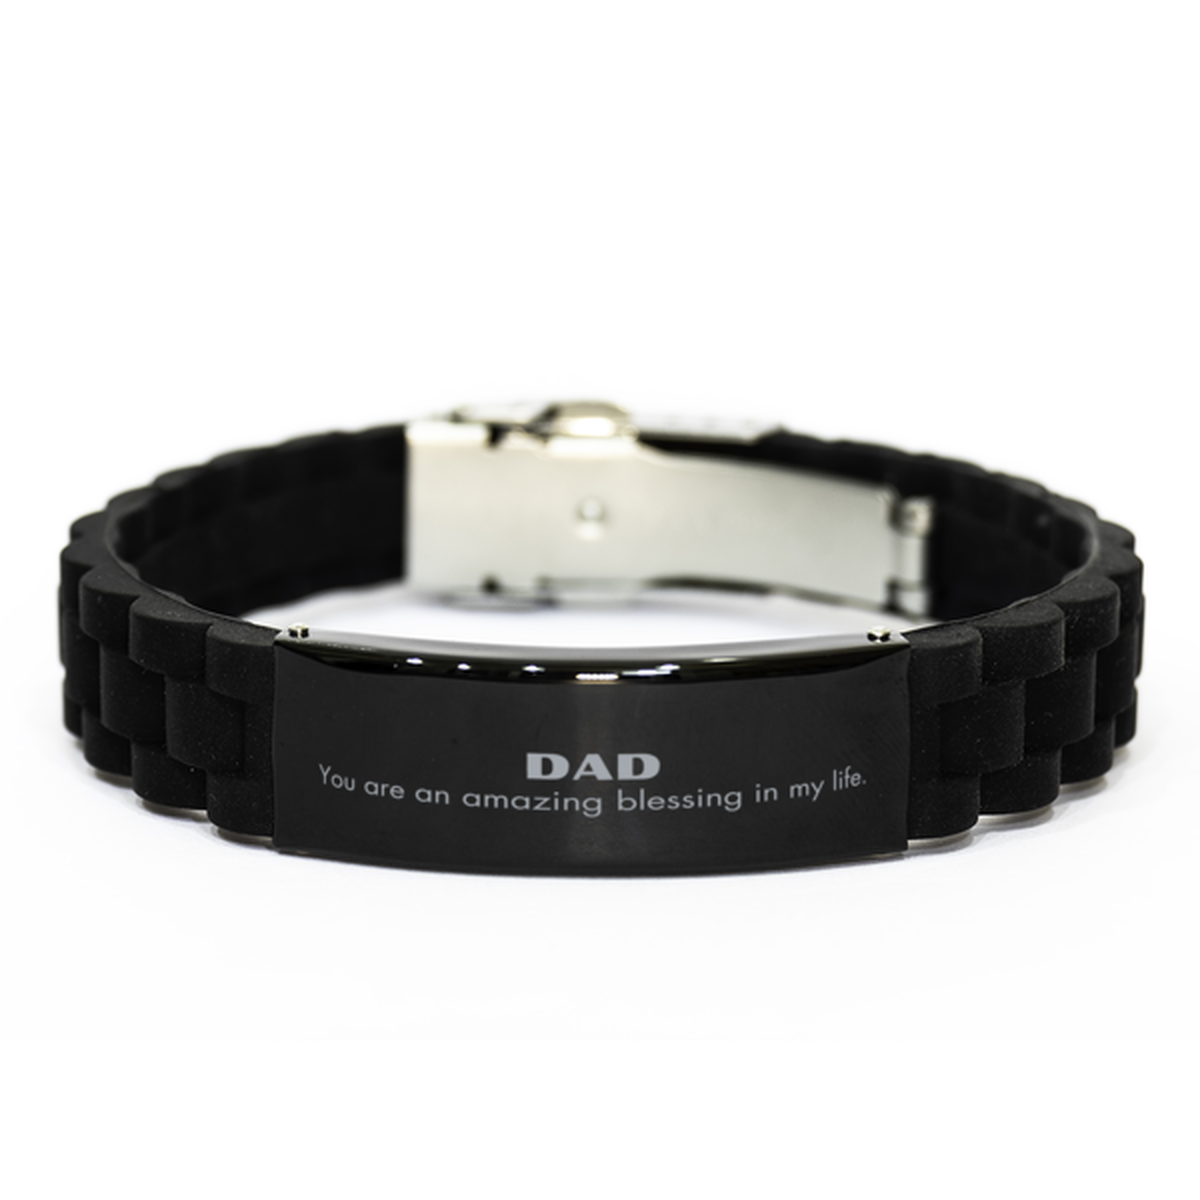 Dad Black Glidelock Clasp Bracelet, You are an amazing blessing in my life, Thank You Gifts For Dad, Inspirational Birthday Christmas Unique Gifts For Dad